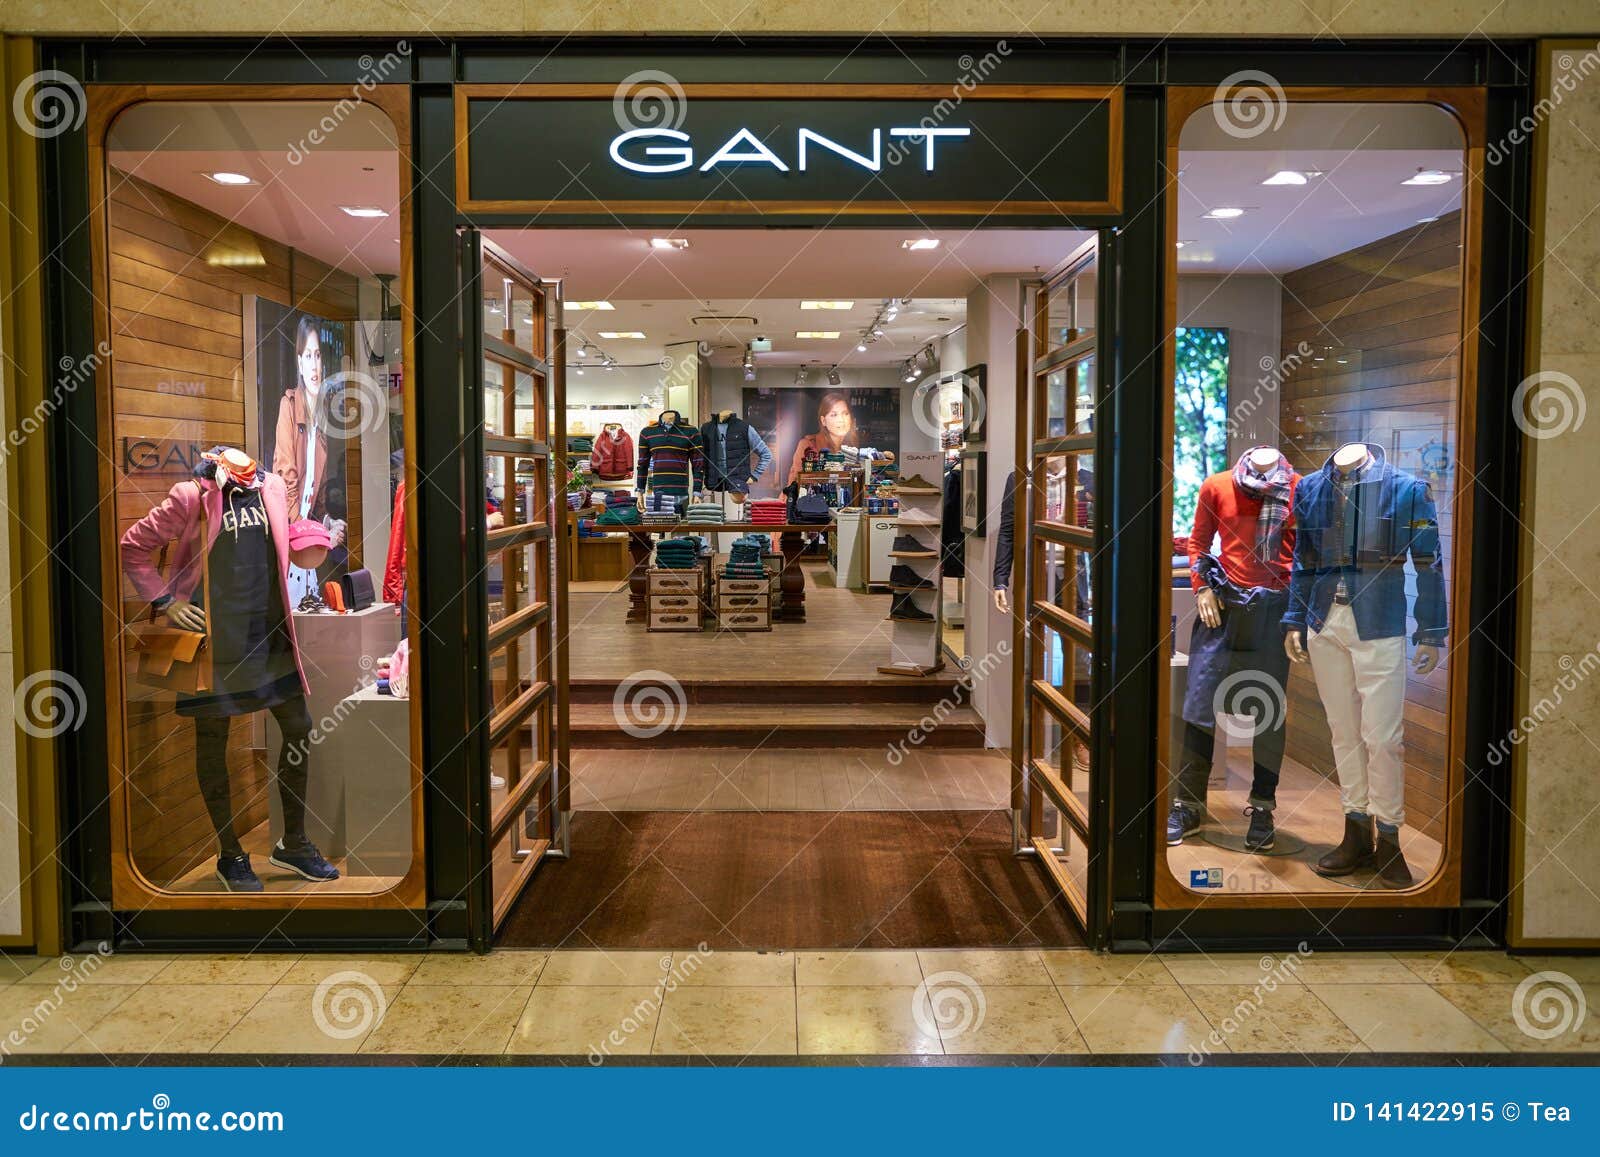 GANT editorial Image of entrance, store 141422915